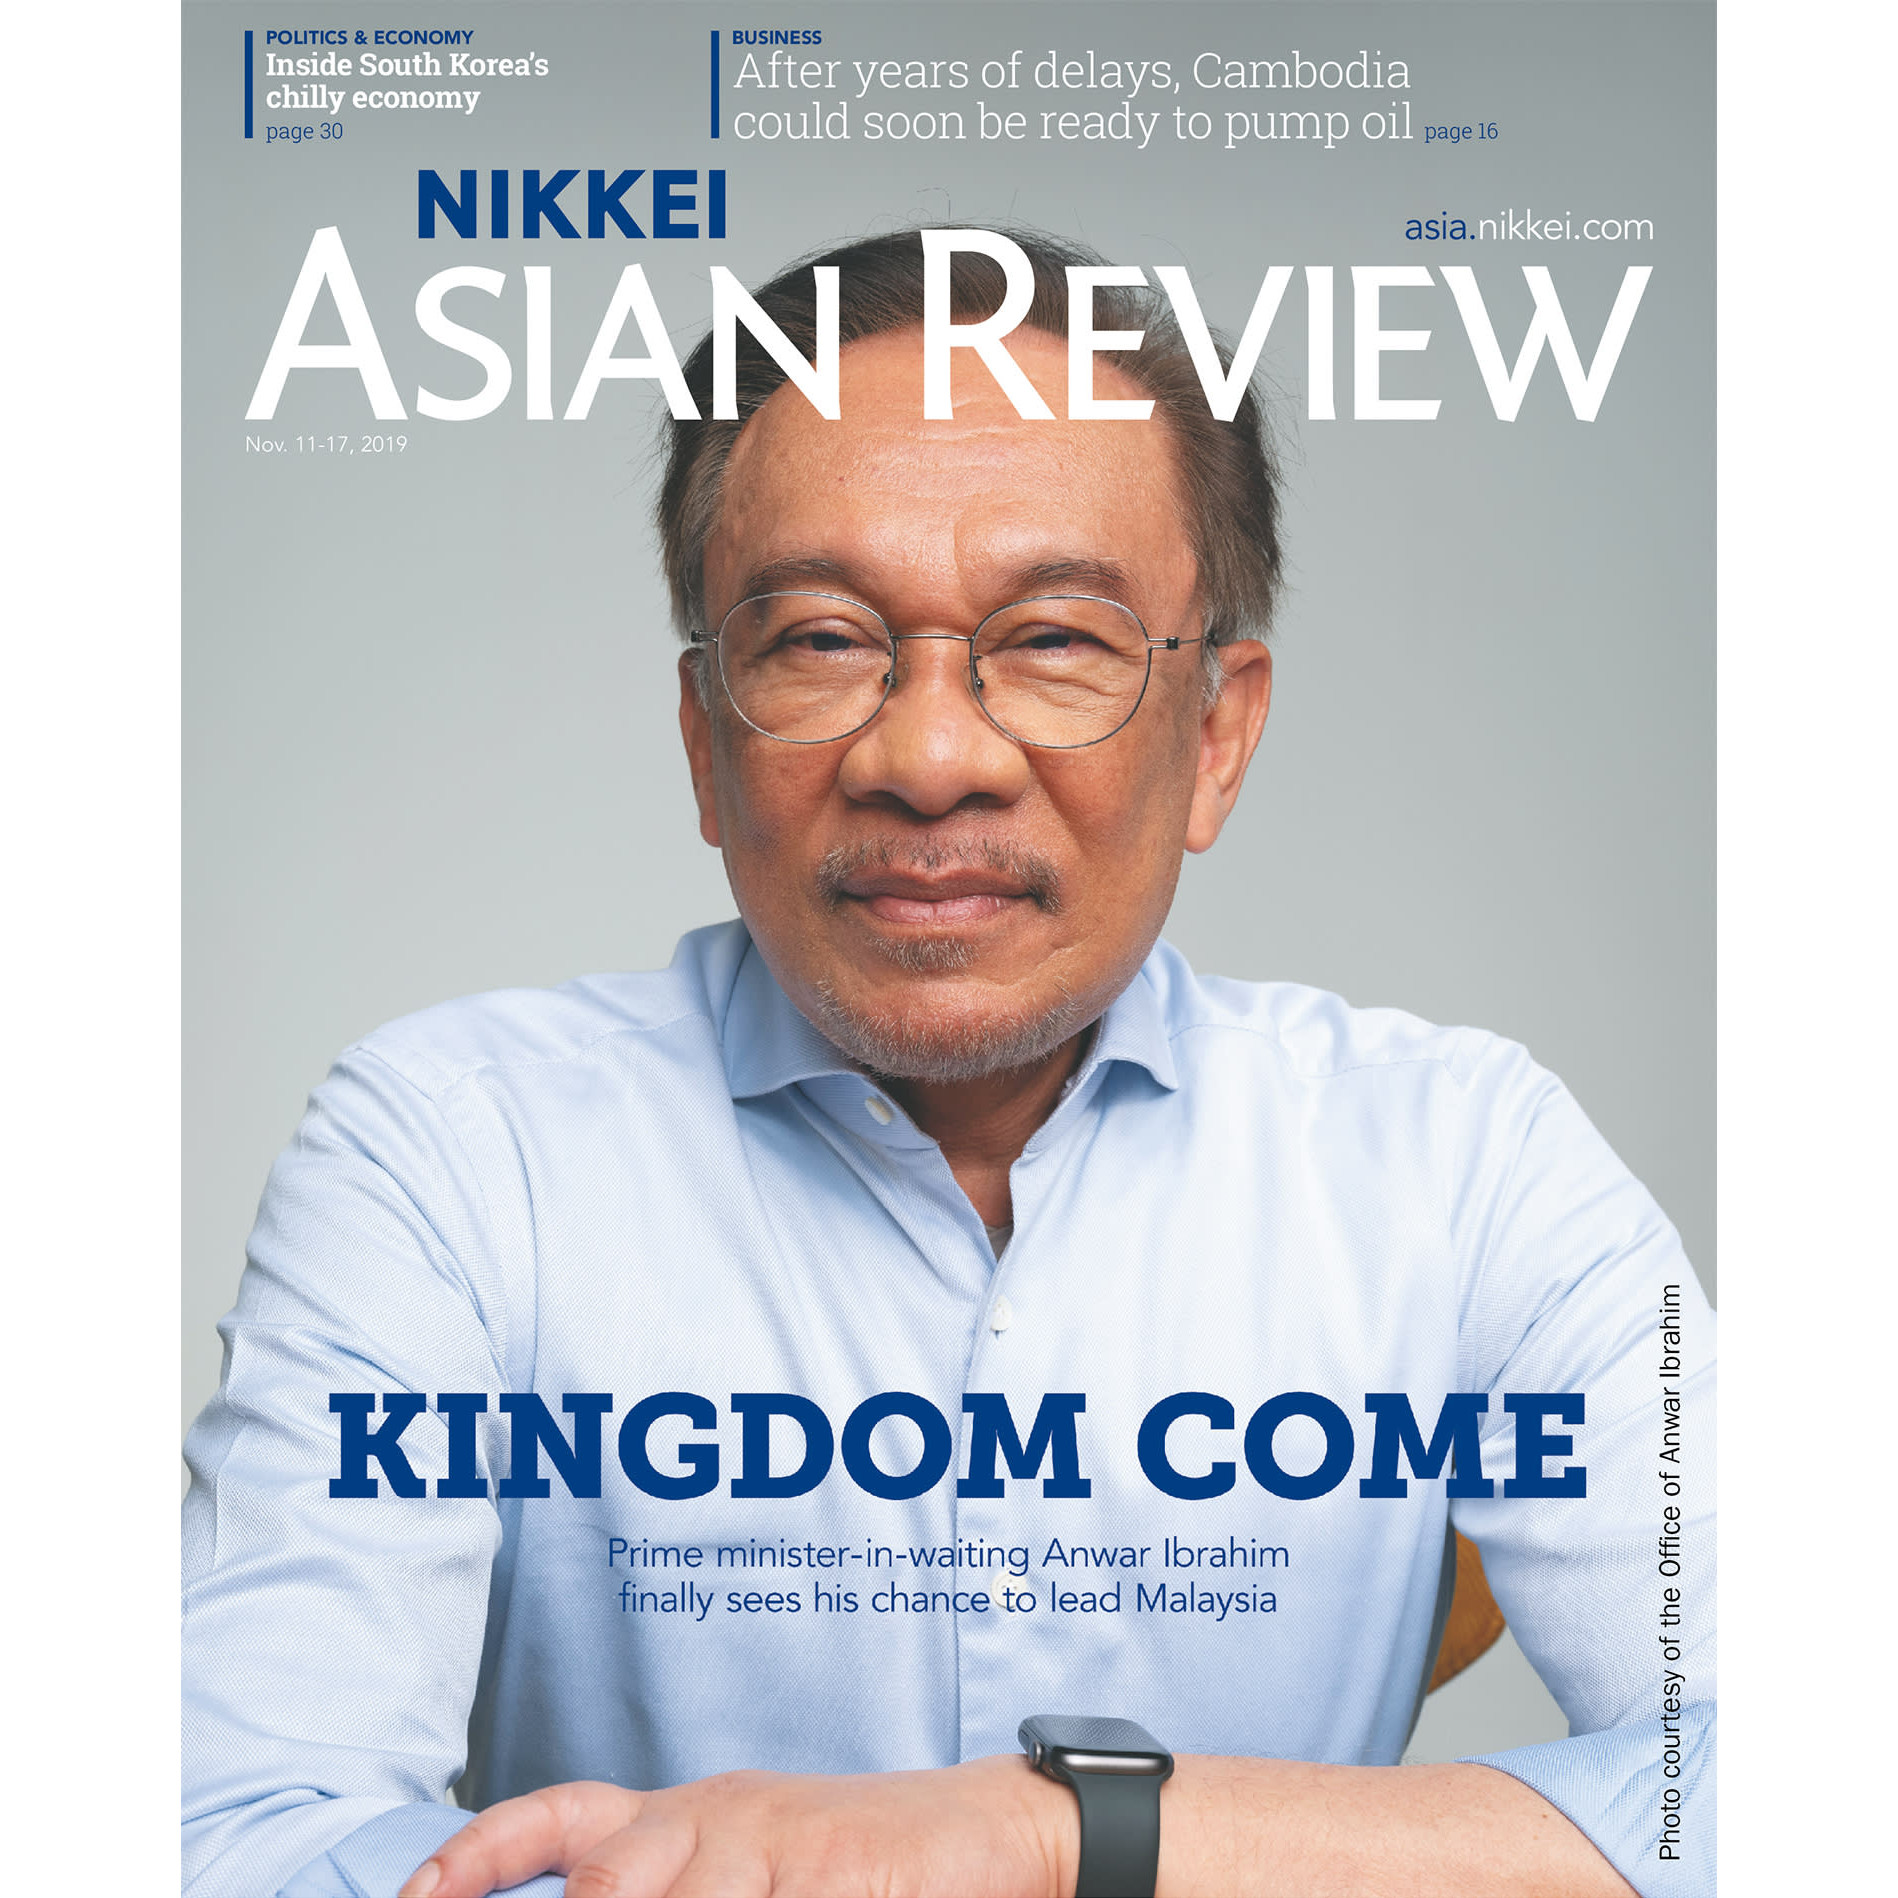 Nikkei Asian Review: Kingdom Come - 44.19